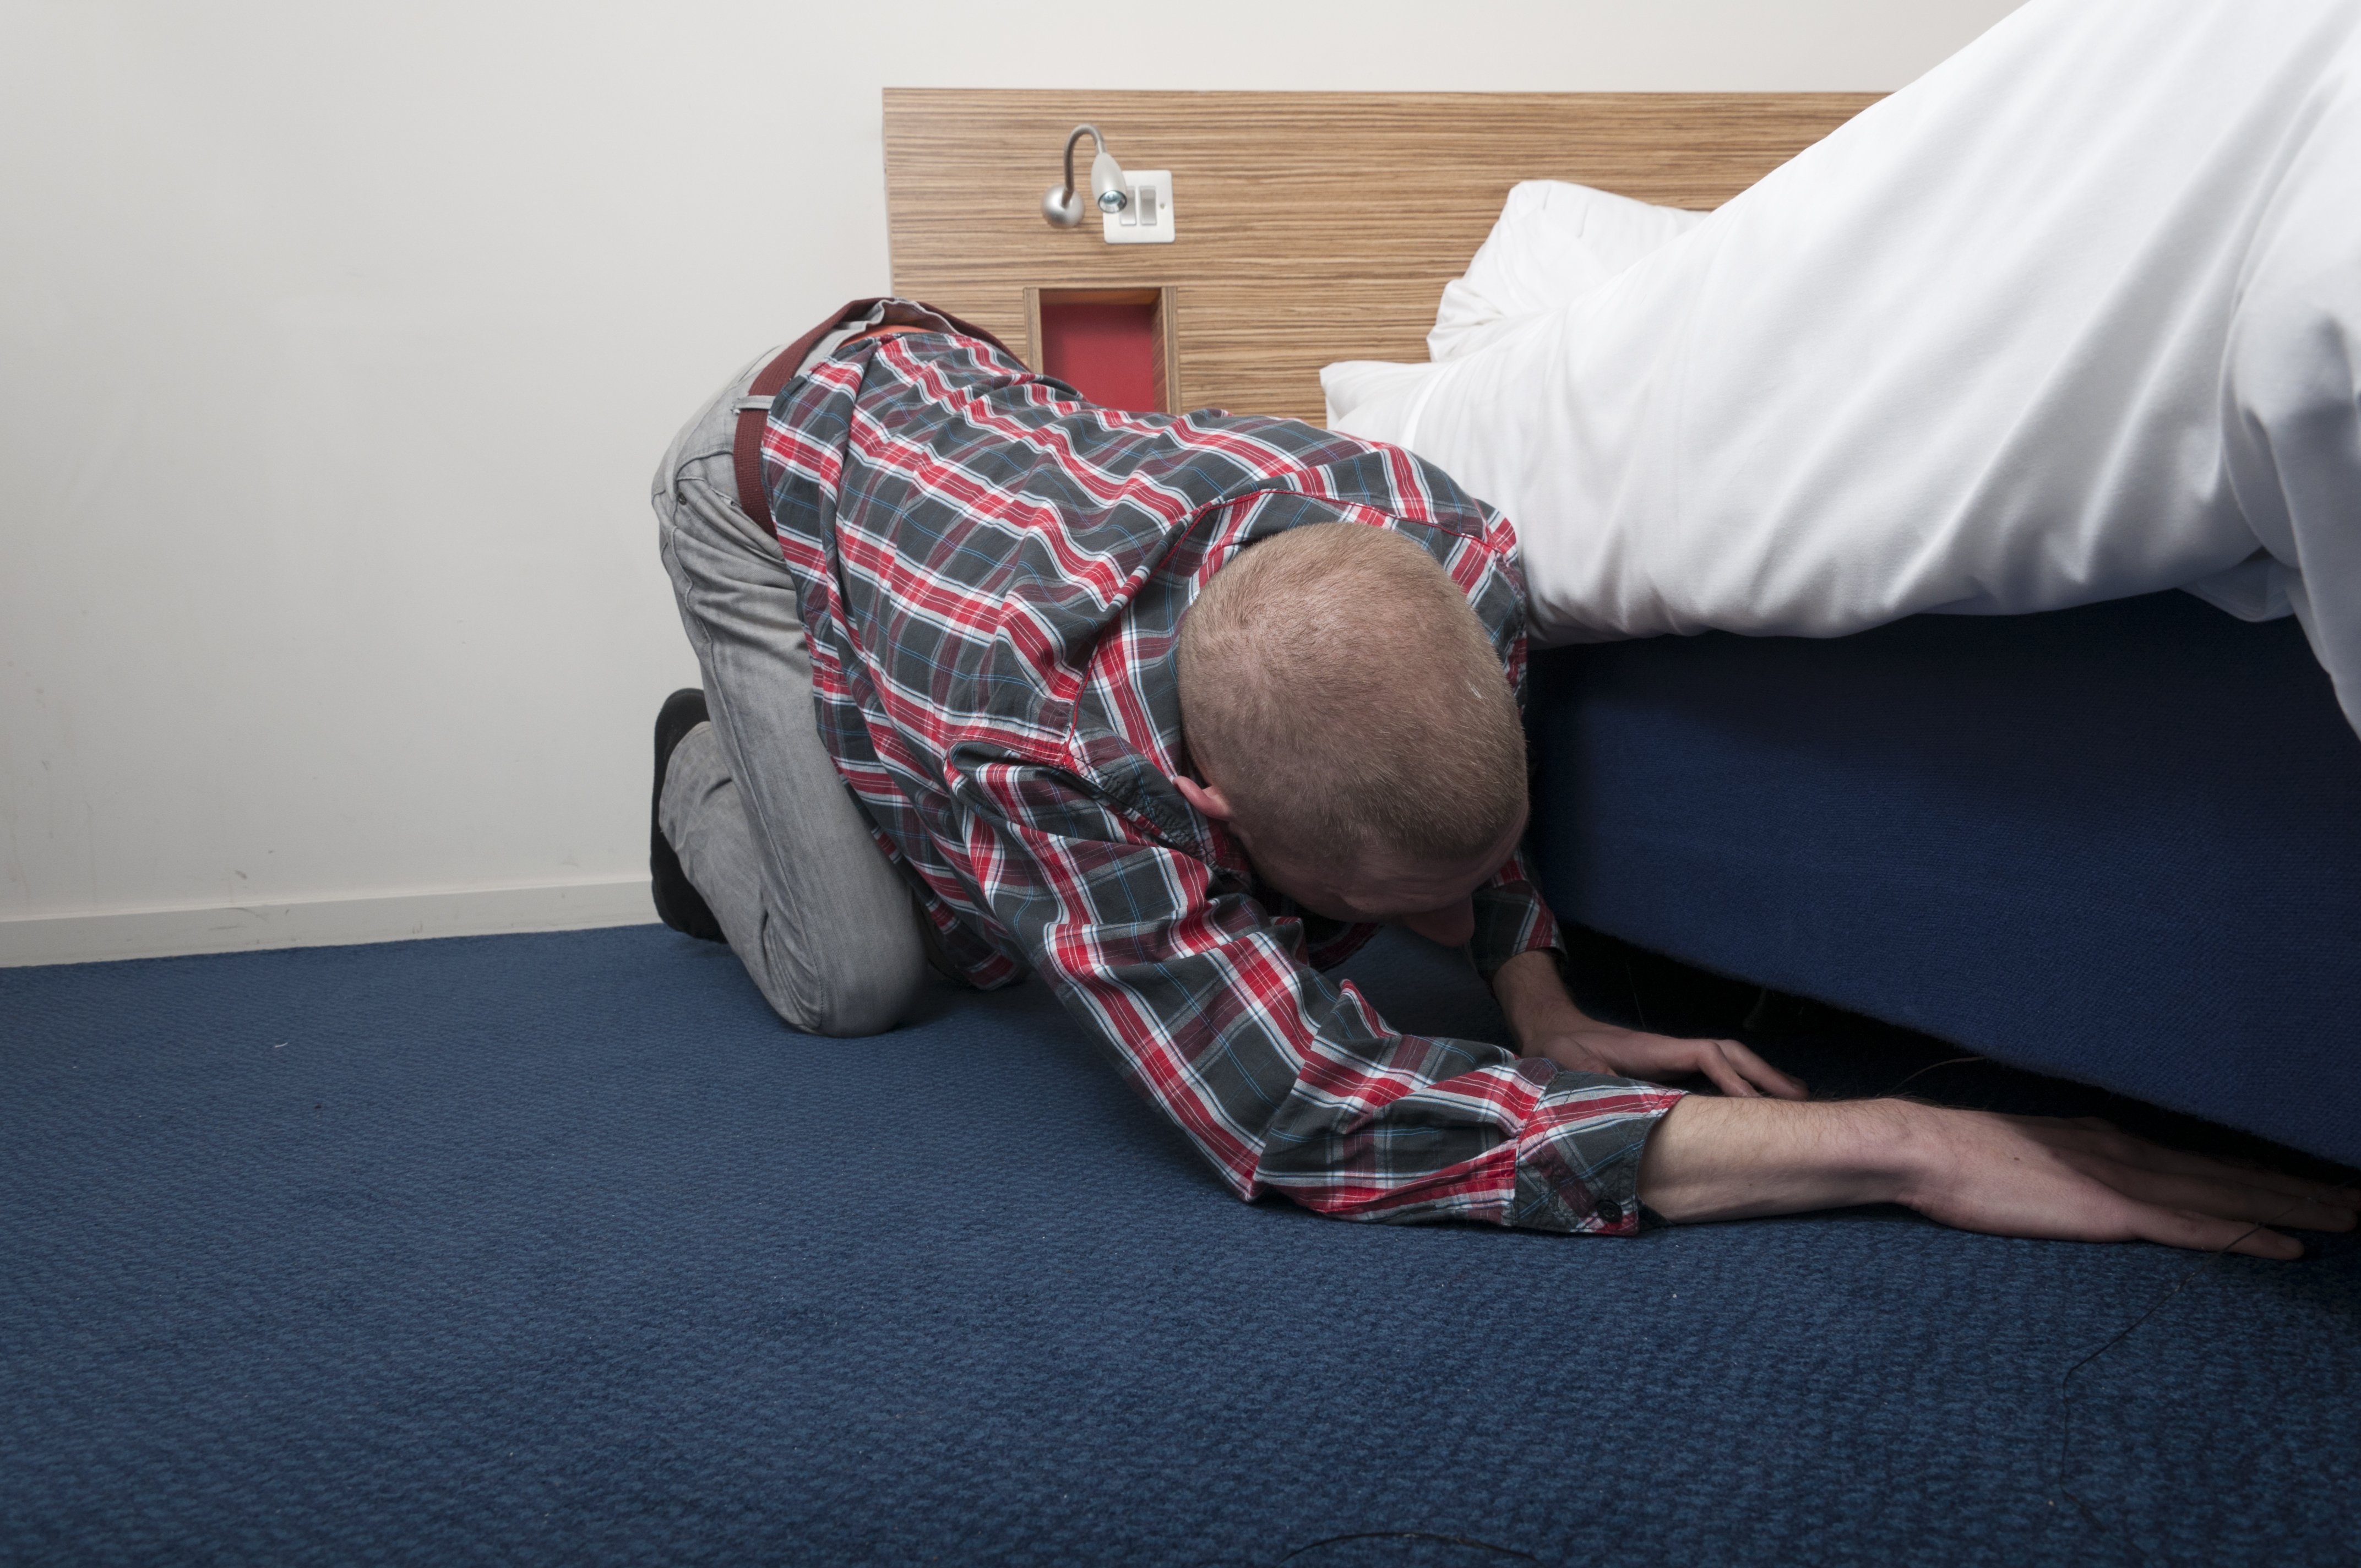 Man looking under the bed. Image credit: Shutterstock